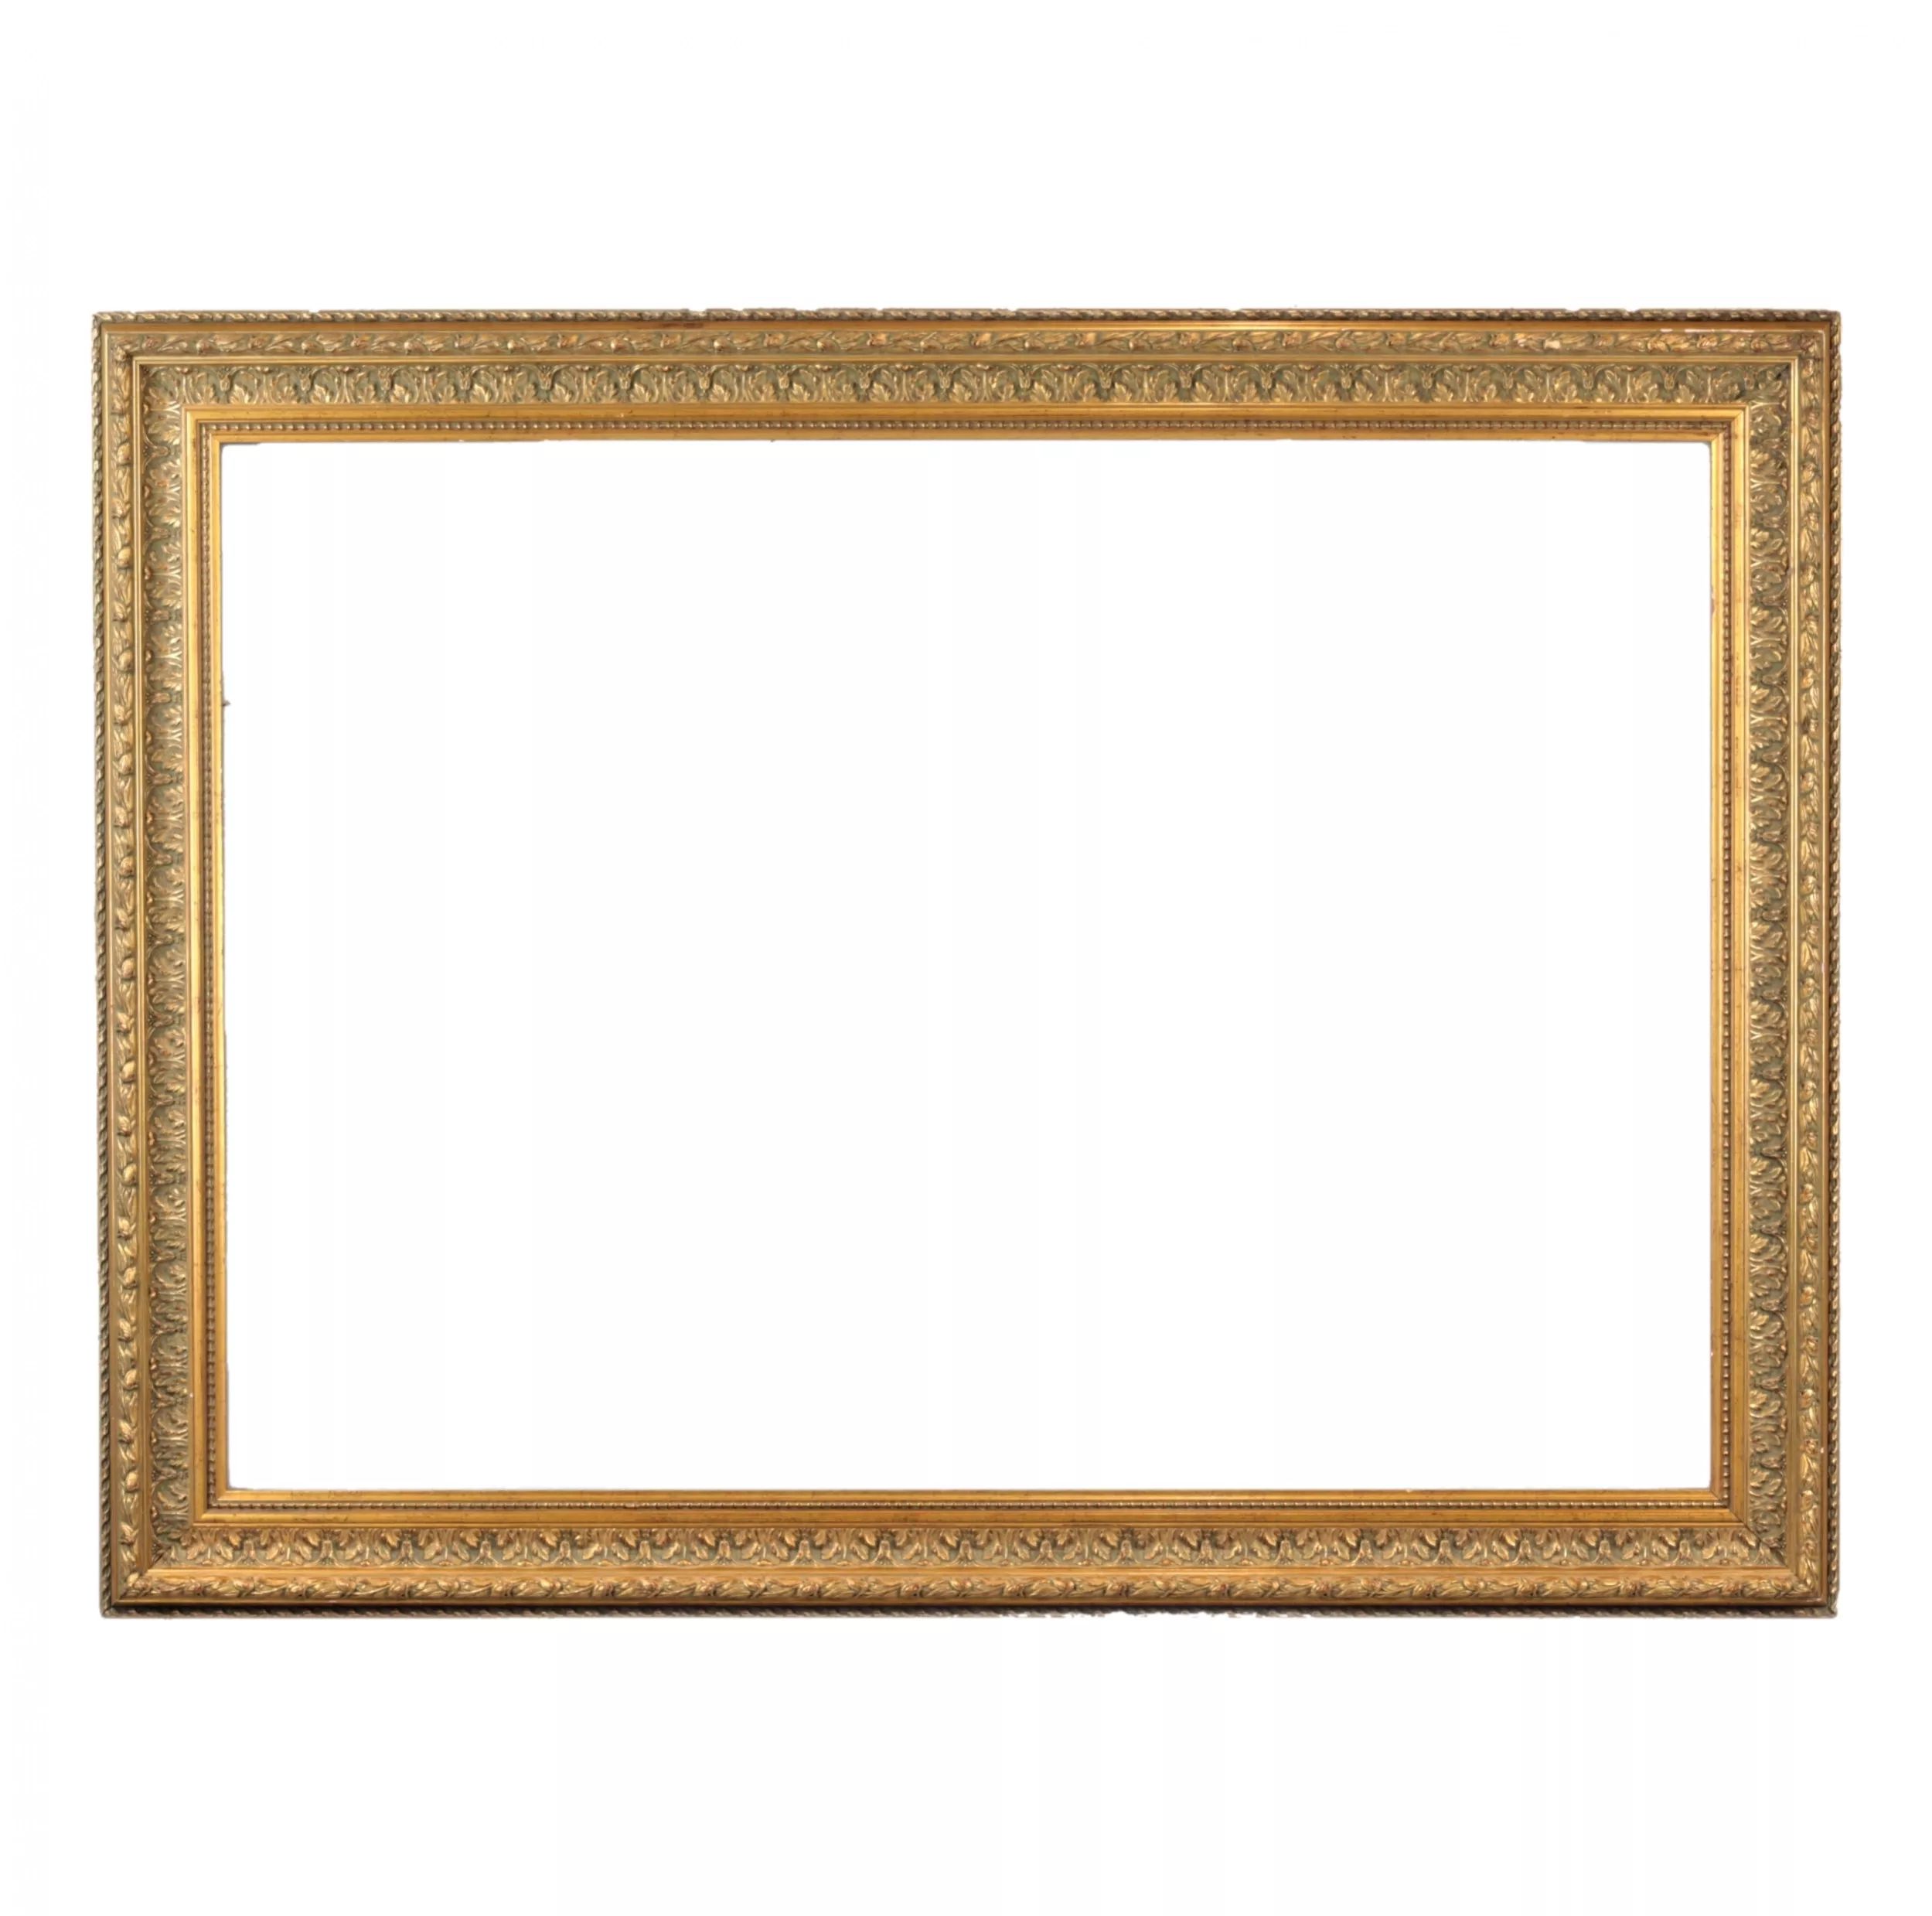 Picture-frame